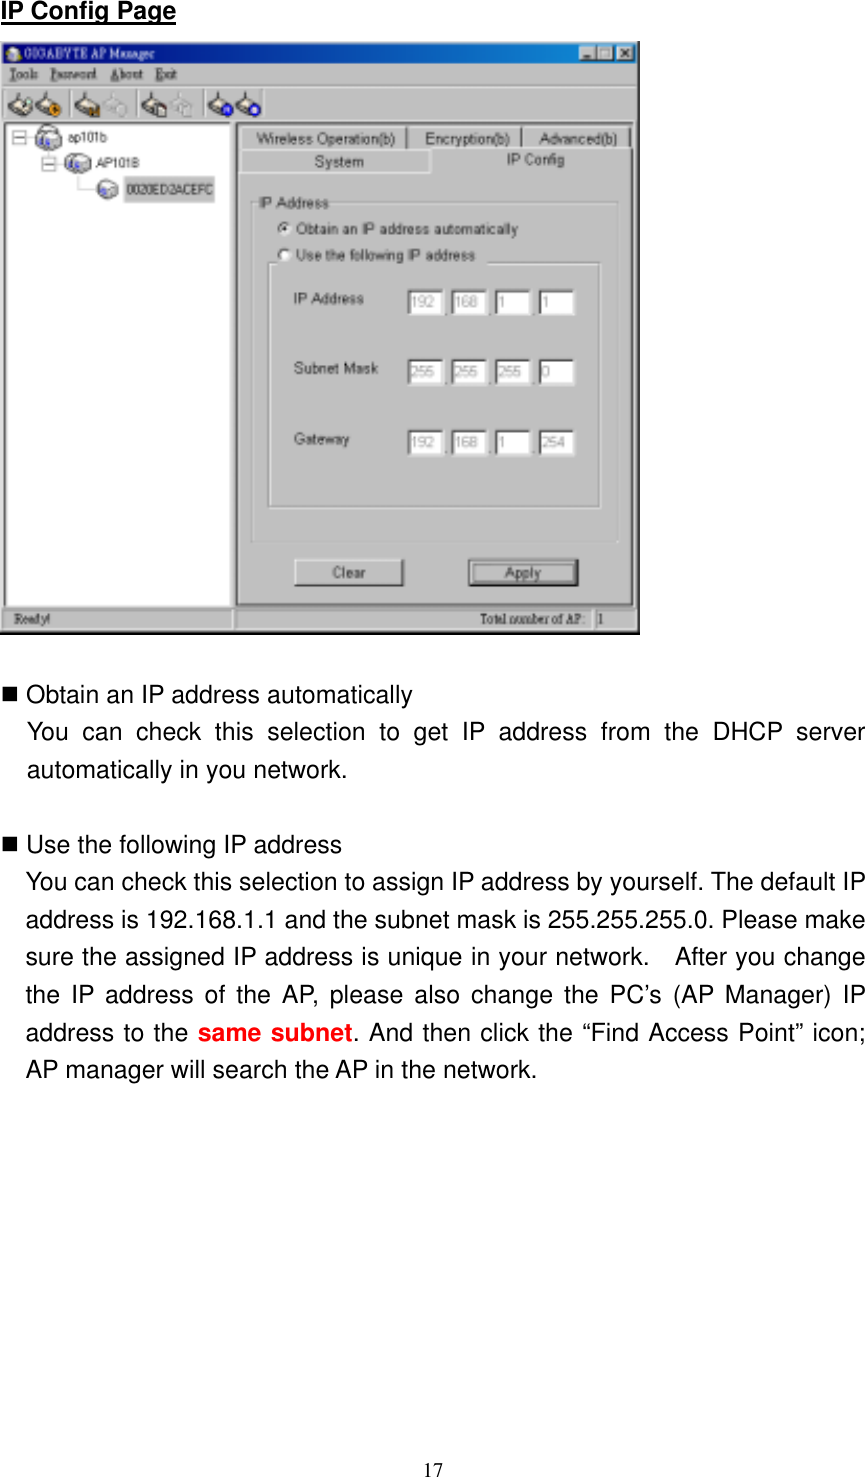 17  IP Config Page    Obtain an IP address automatically   You can check this selection to get IP address from the DHCP server automatically in you network.   Use the following IP address       You can check this selection to assign IP address by yourself. The default IP address is 192.168.1.1 and the subnet mask is 255.255.255.0. Please make sure the assigned IP address is unique in your network.    After you change the IP address of the AP, please also change the PC’s (AP Manager) IP address to the same subnet. And then click the “Find Access Point” icon; AP manager will search the AP in the network. 